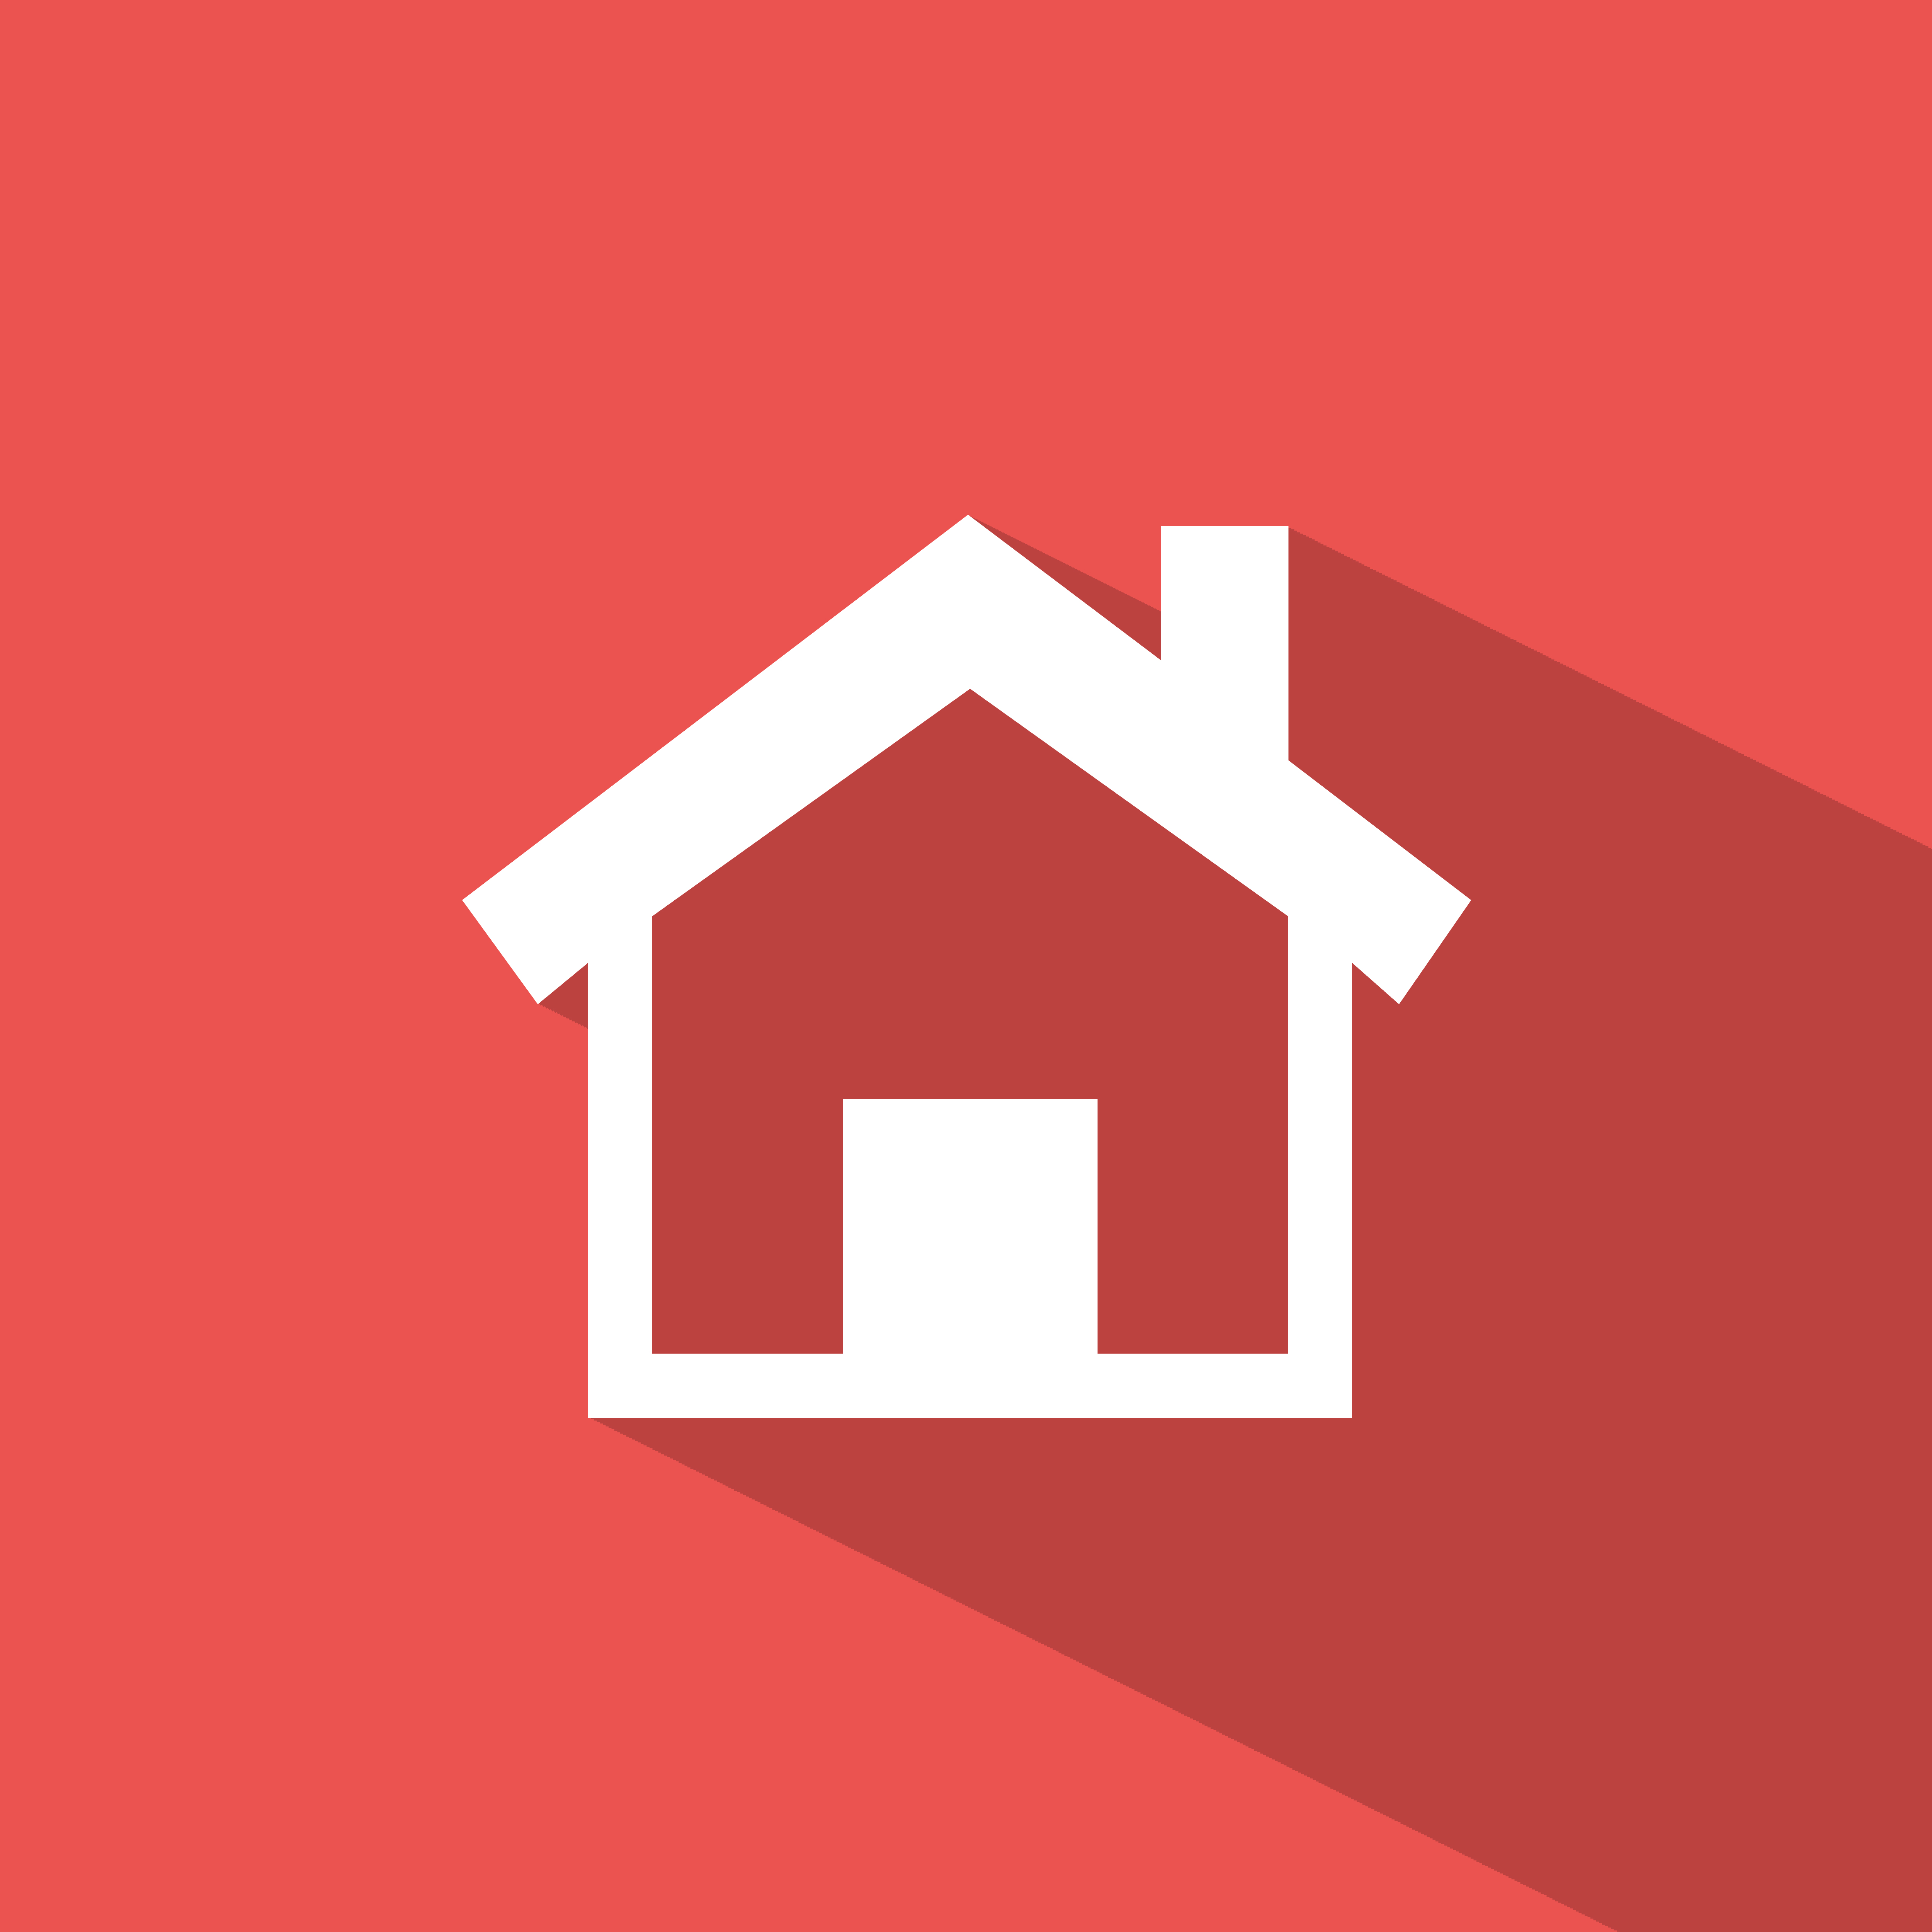 Houses icons | Noun Project